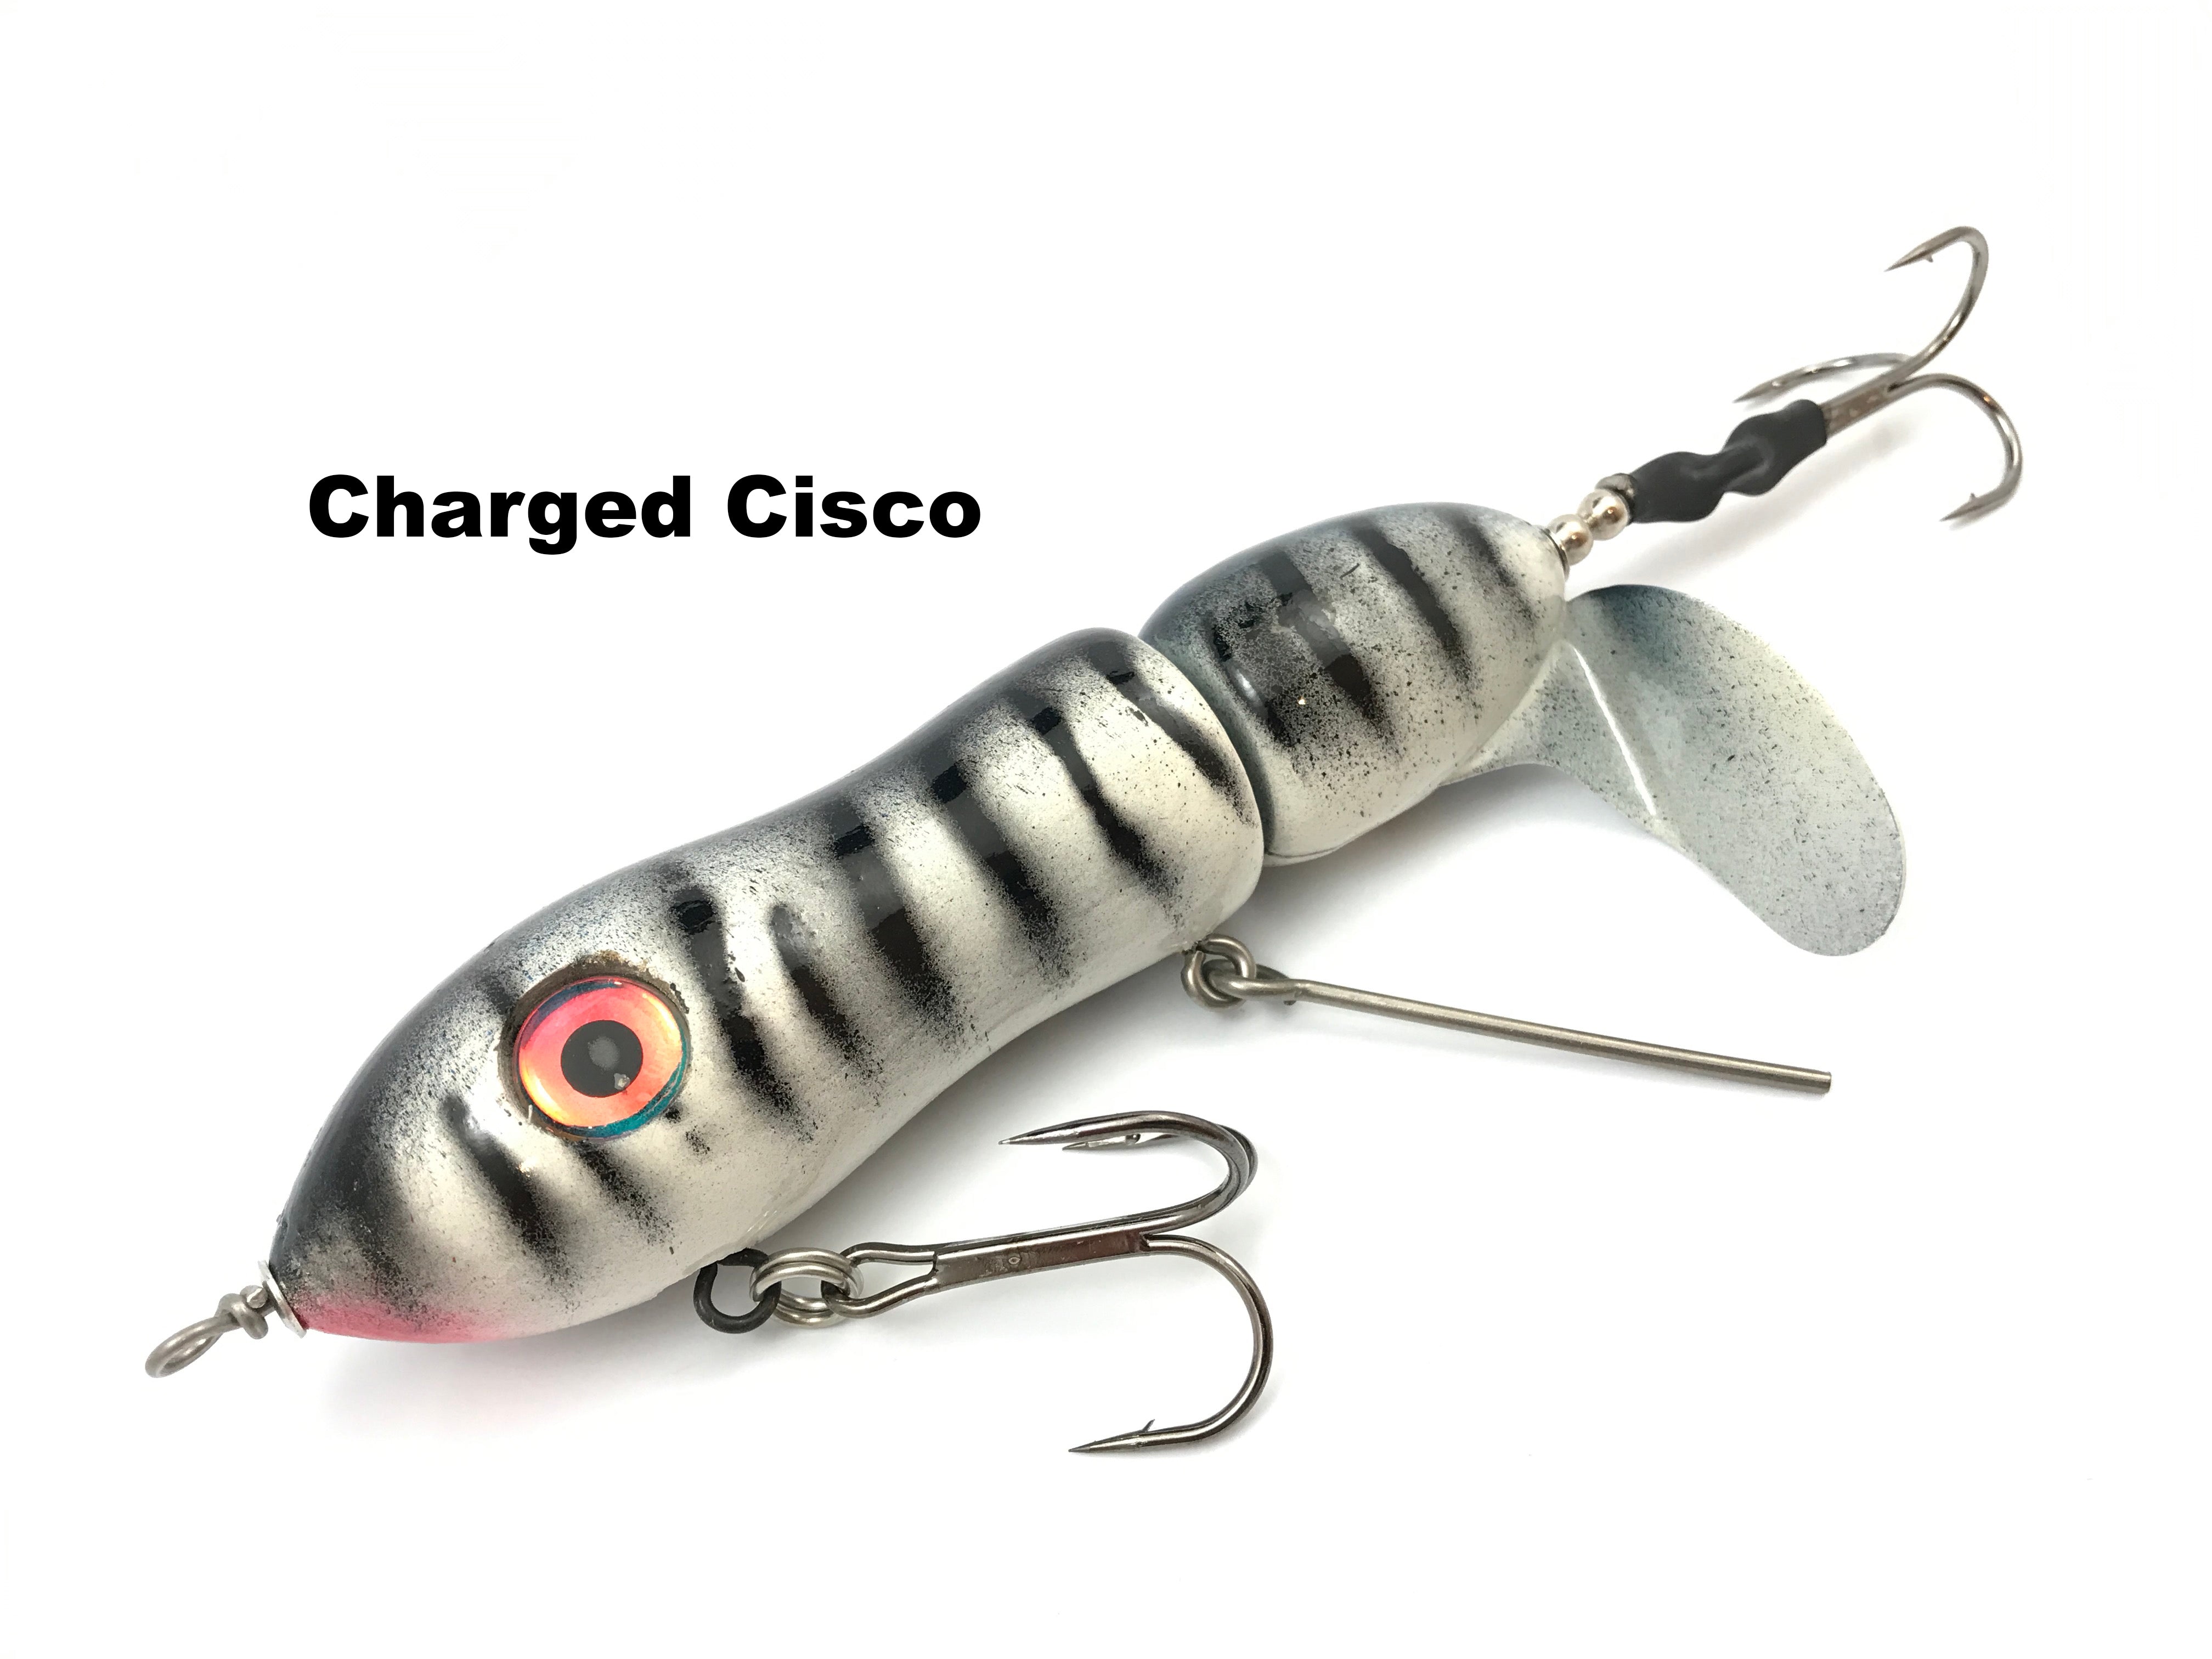 Big Mama Lure Co. Twisted Sis'tr - Musky Tackle Online